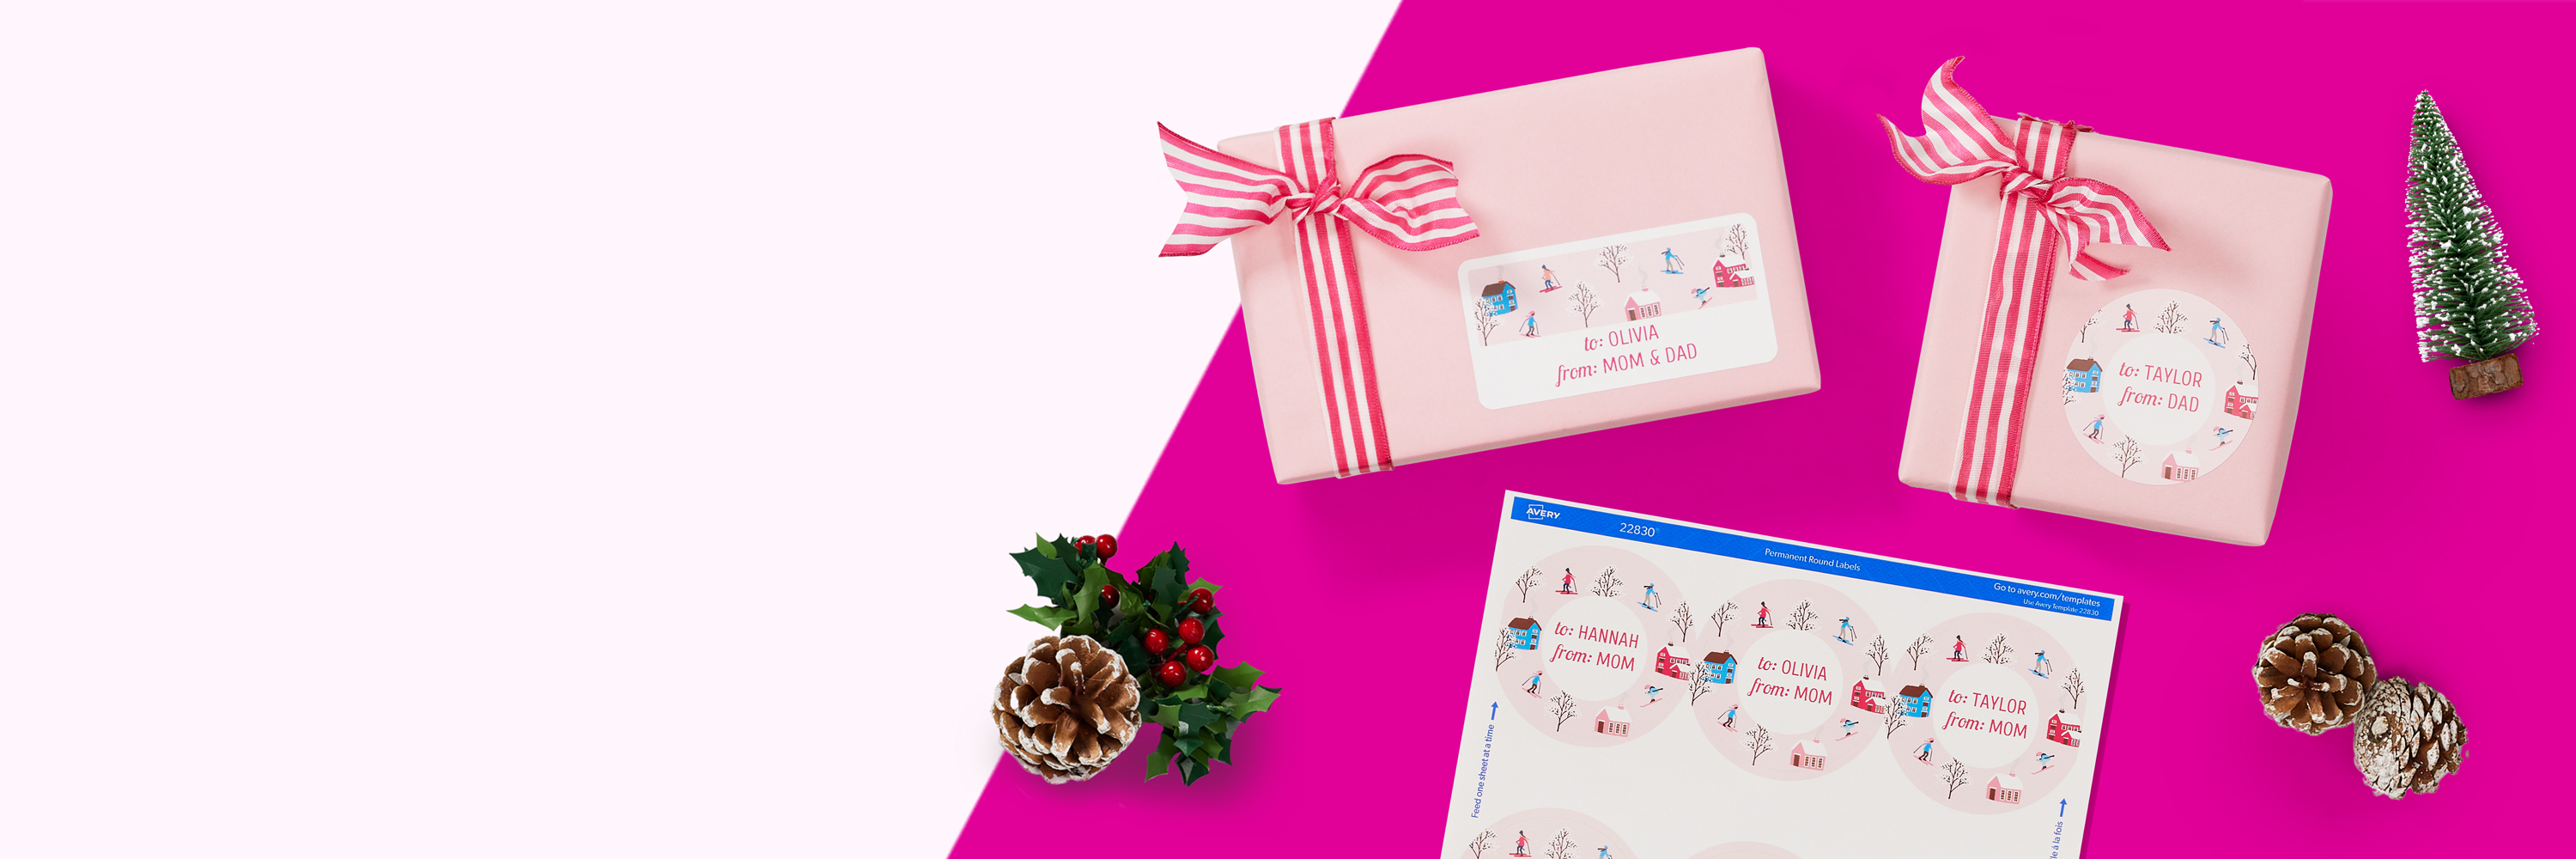 Motion graphic flatlay of two holiday gifts in pink wrapping paper tied with pink and white striped ribbons, one with a larger rectangle label on top and the other with a large round label on top, sitting next to a printed sheet of large round labels with a pink design. The gifts and labels are surrounded by a small faux holiday tree, snow-dusted pinecones, and holly.